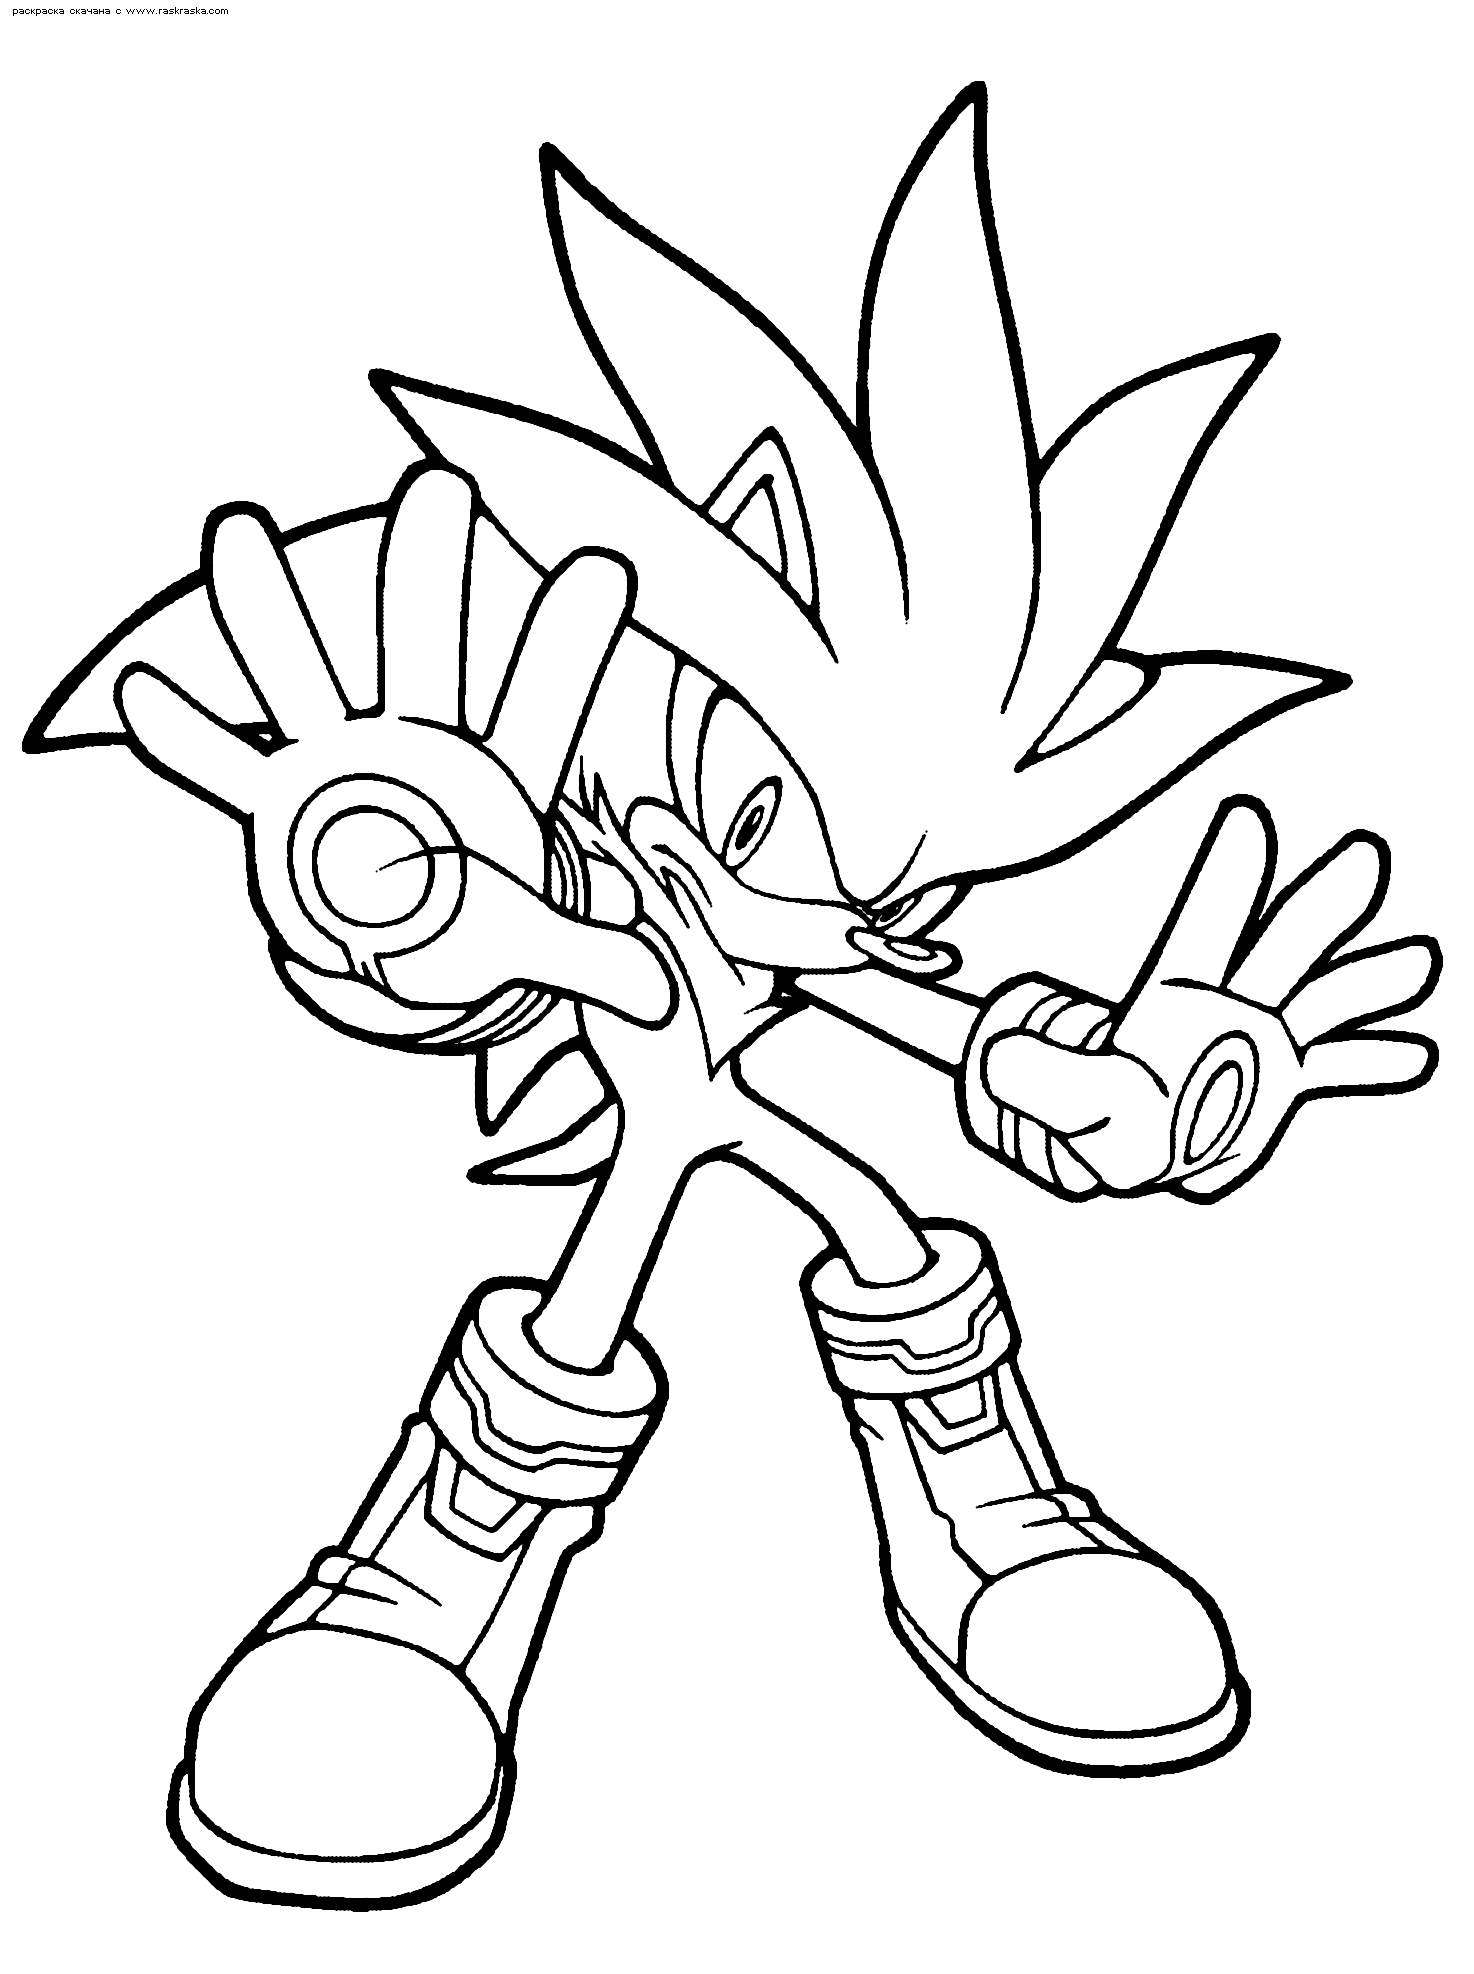 Sonic Coloring Pages (12) - Coloring Kids